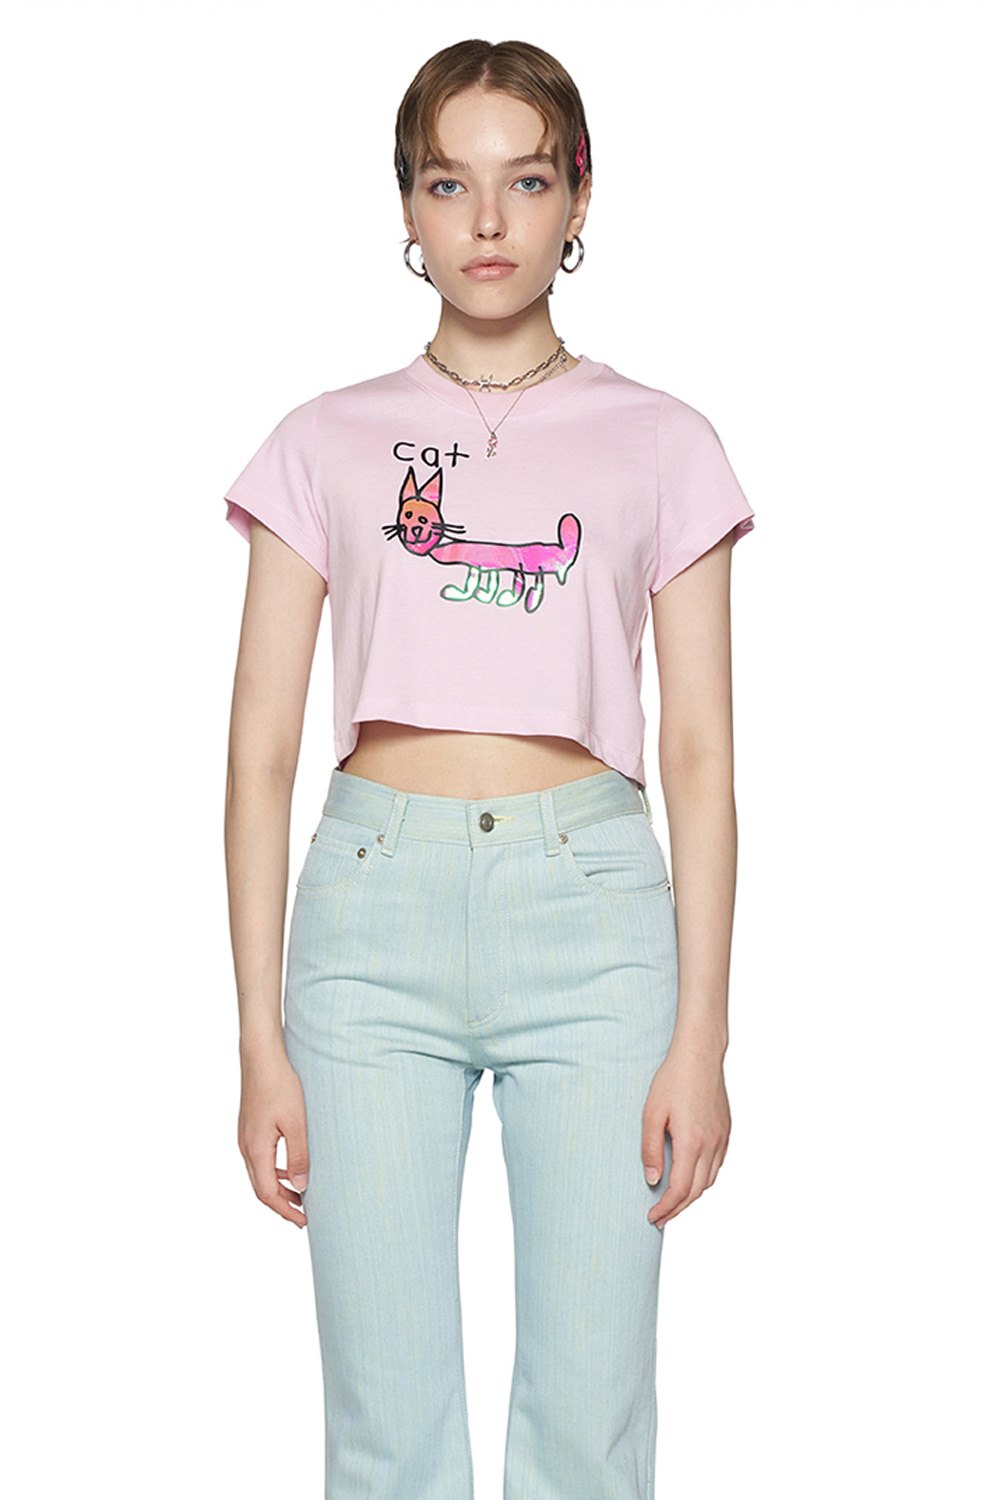 PINK REFLECTIVE CAT CROPPED T-SHIRT